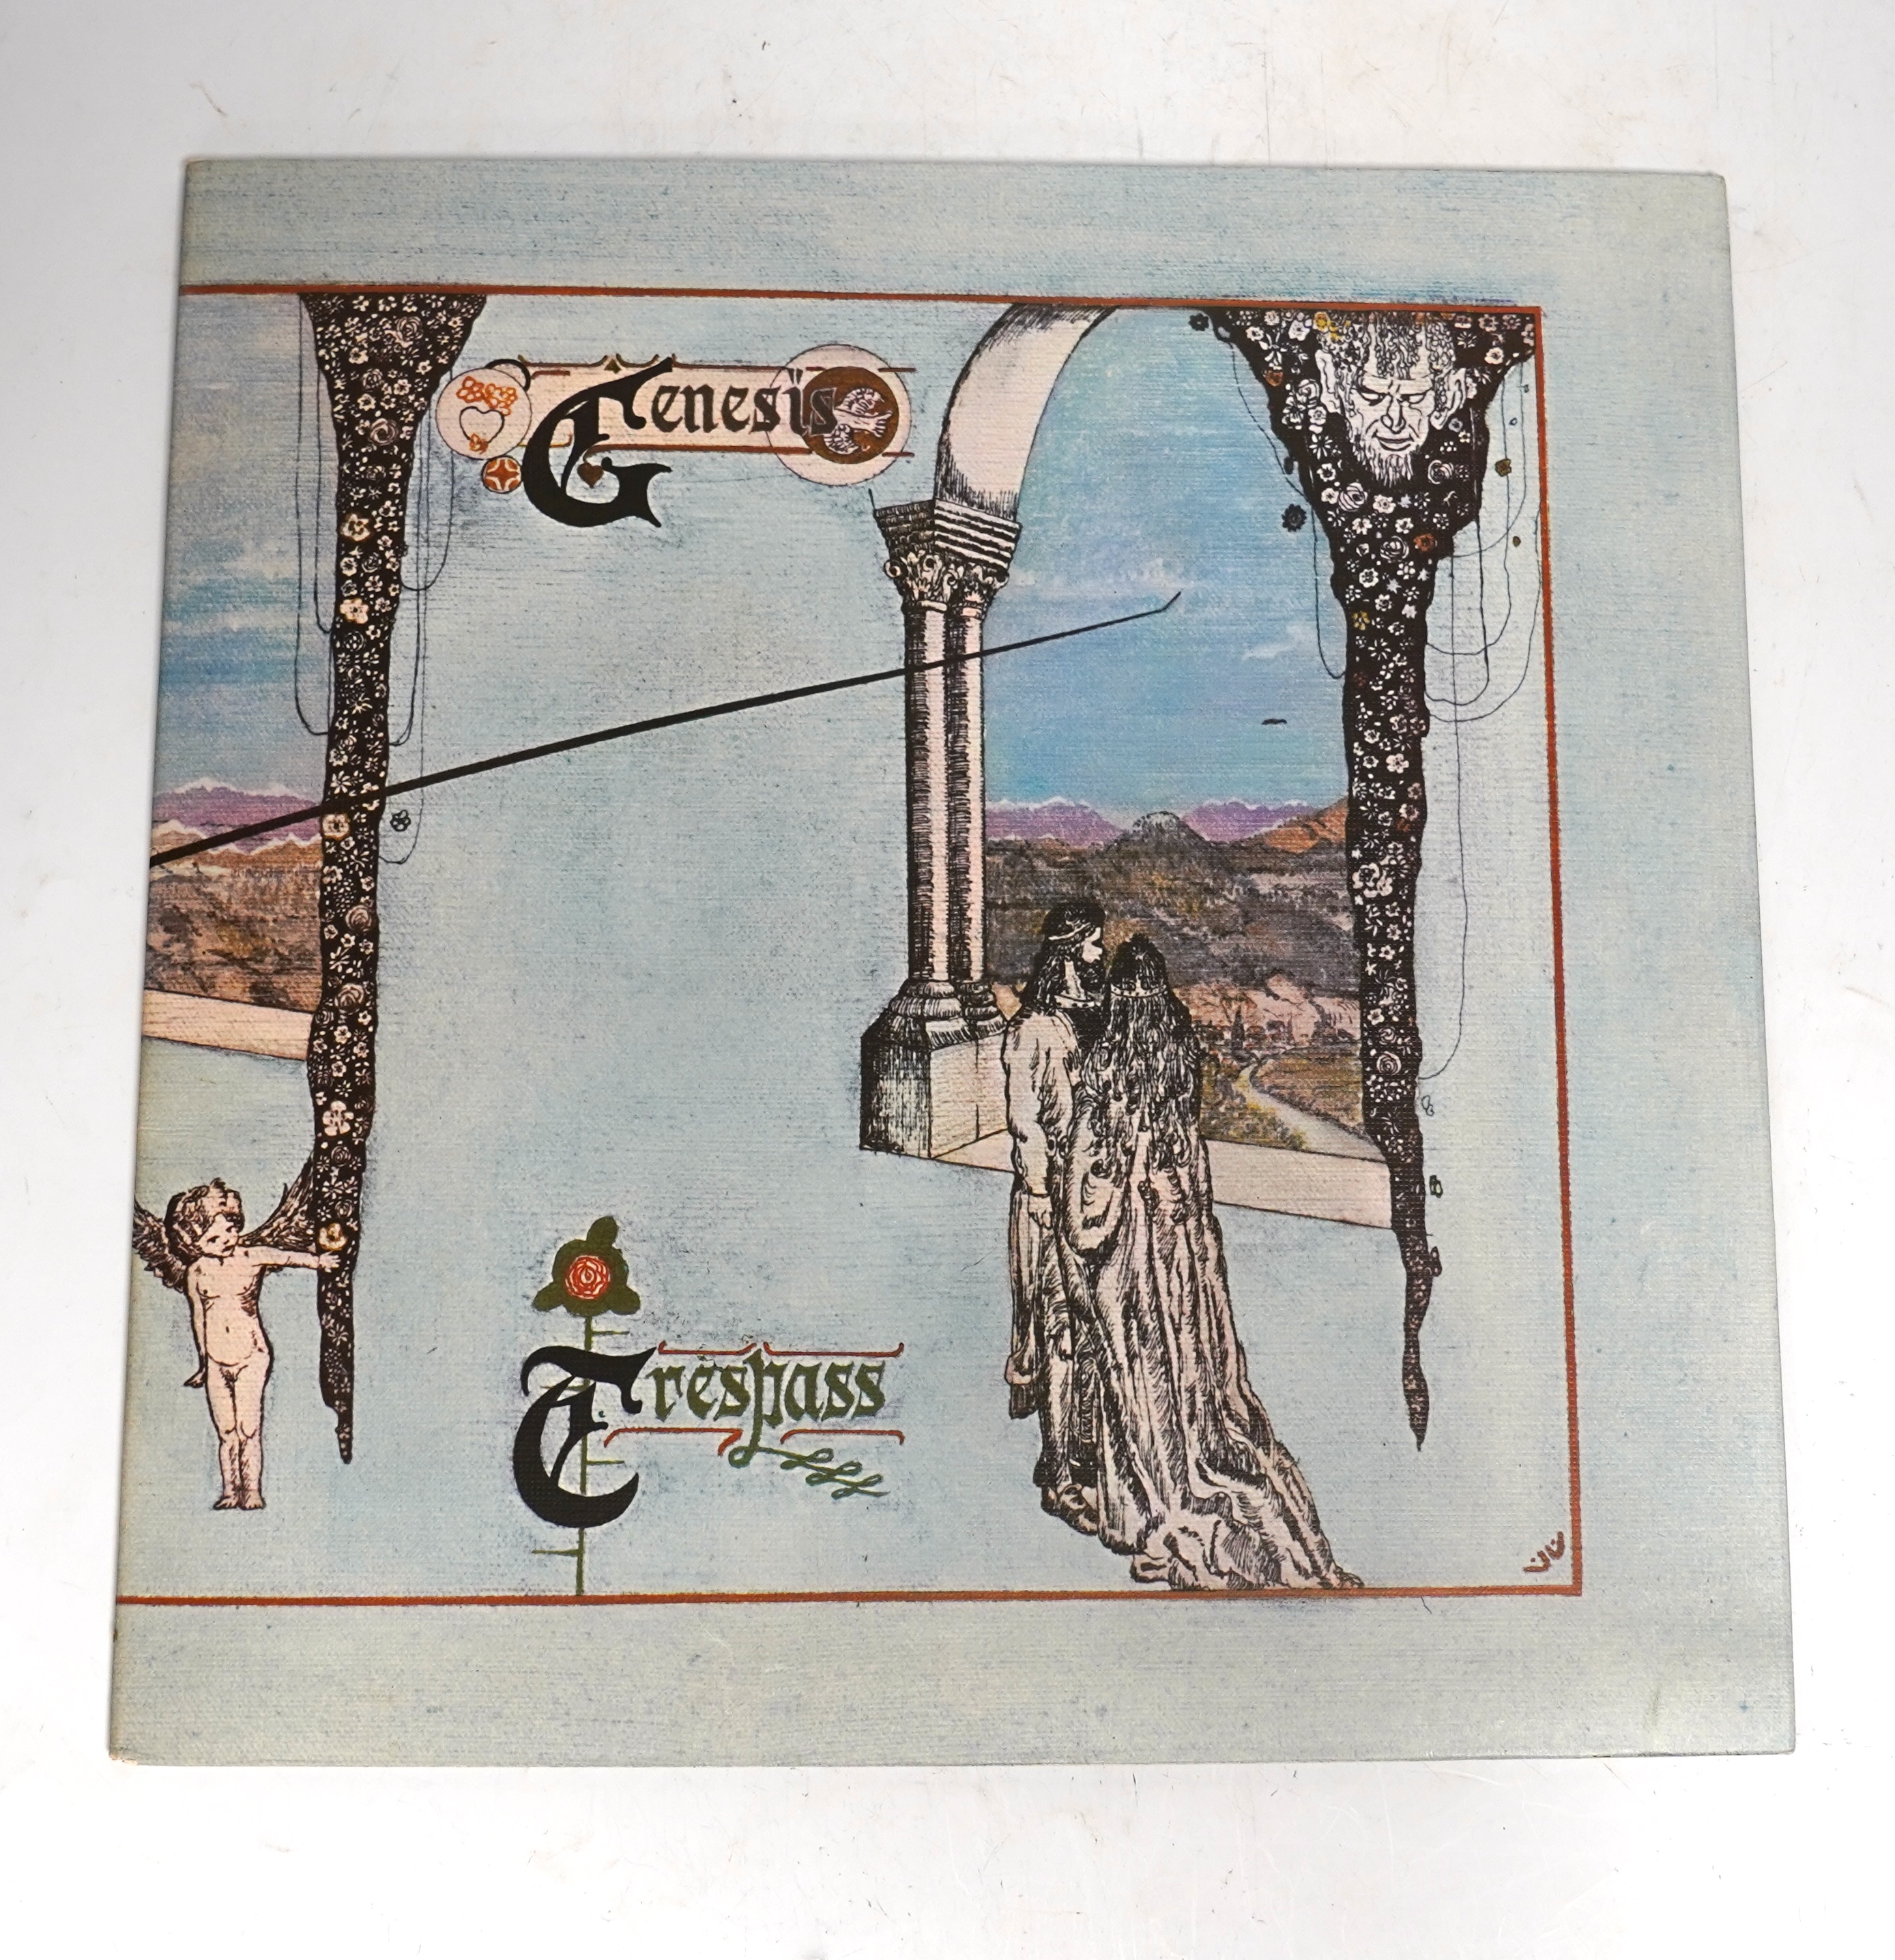 Genesis; Trespass LP record album, on pink scroll Charisma label, CAS.1020, with inner lyric sheet and textured gatefold cover